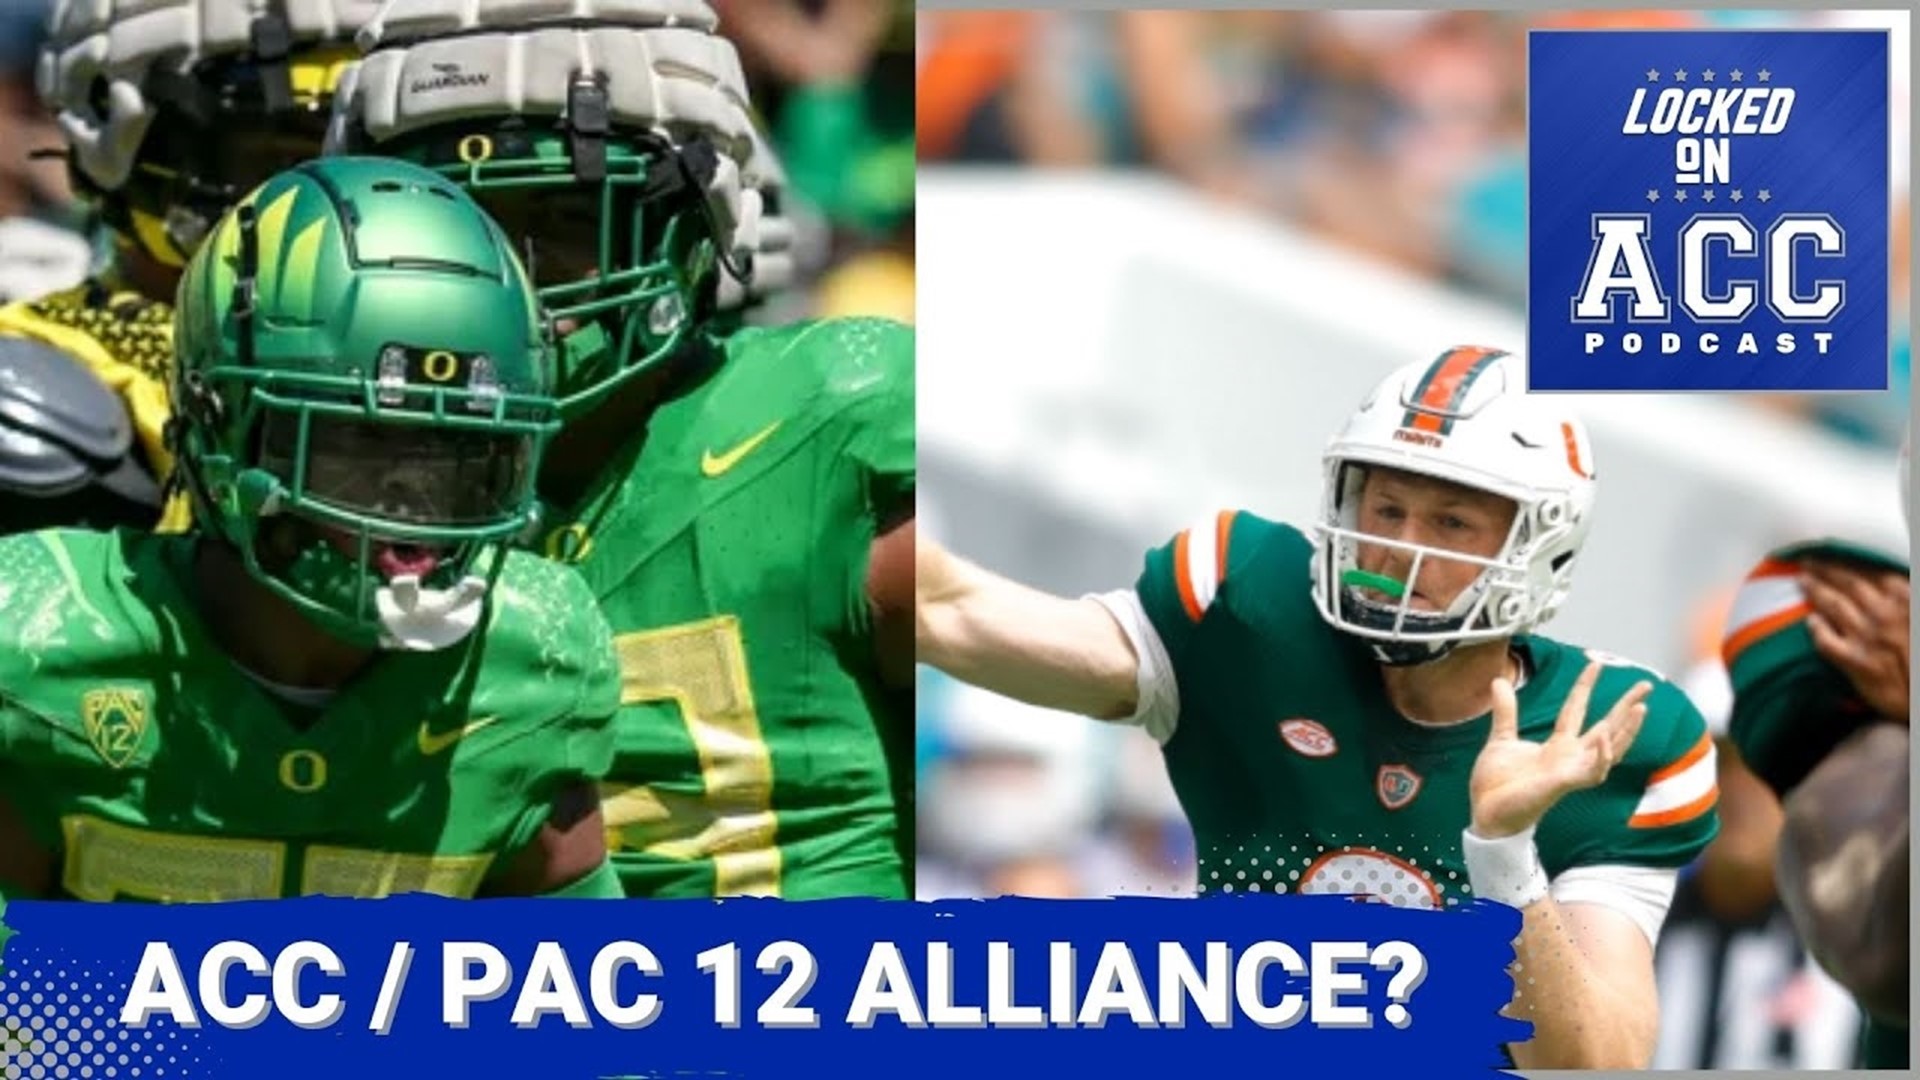 The ACC and the PAC 12 are often left out of the major realignment conversations given the recent television deals from the SEC and Big Ten.